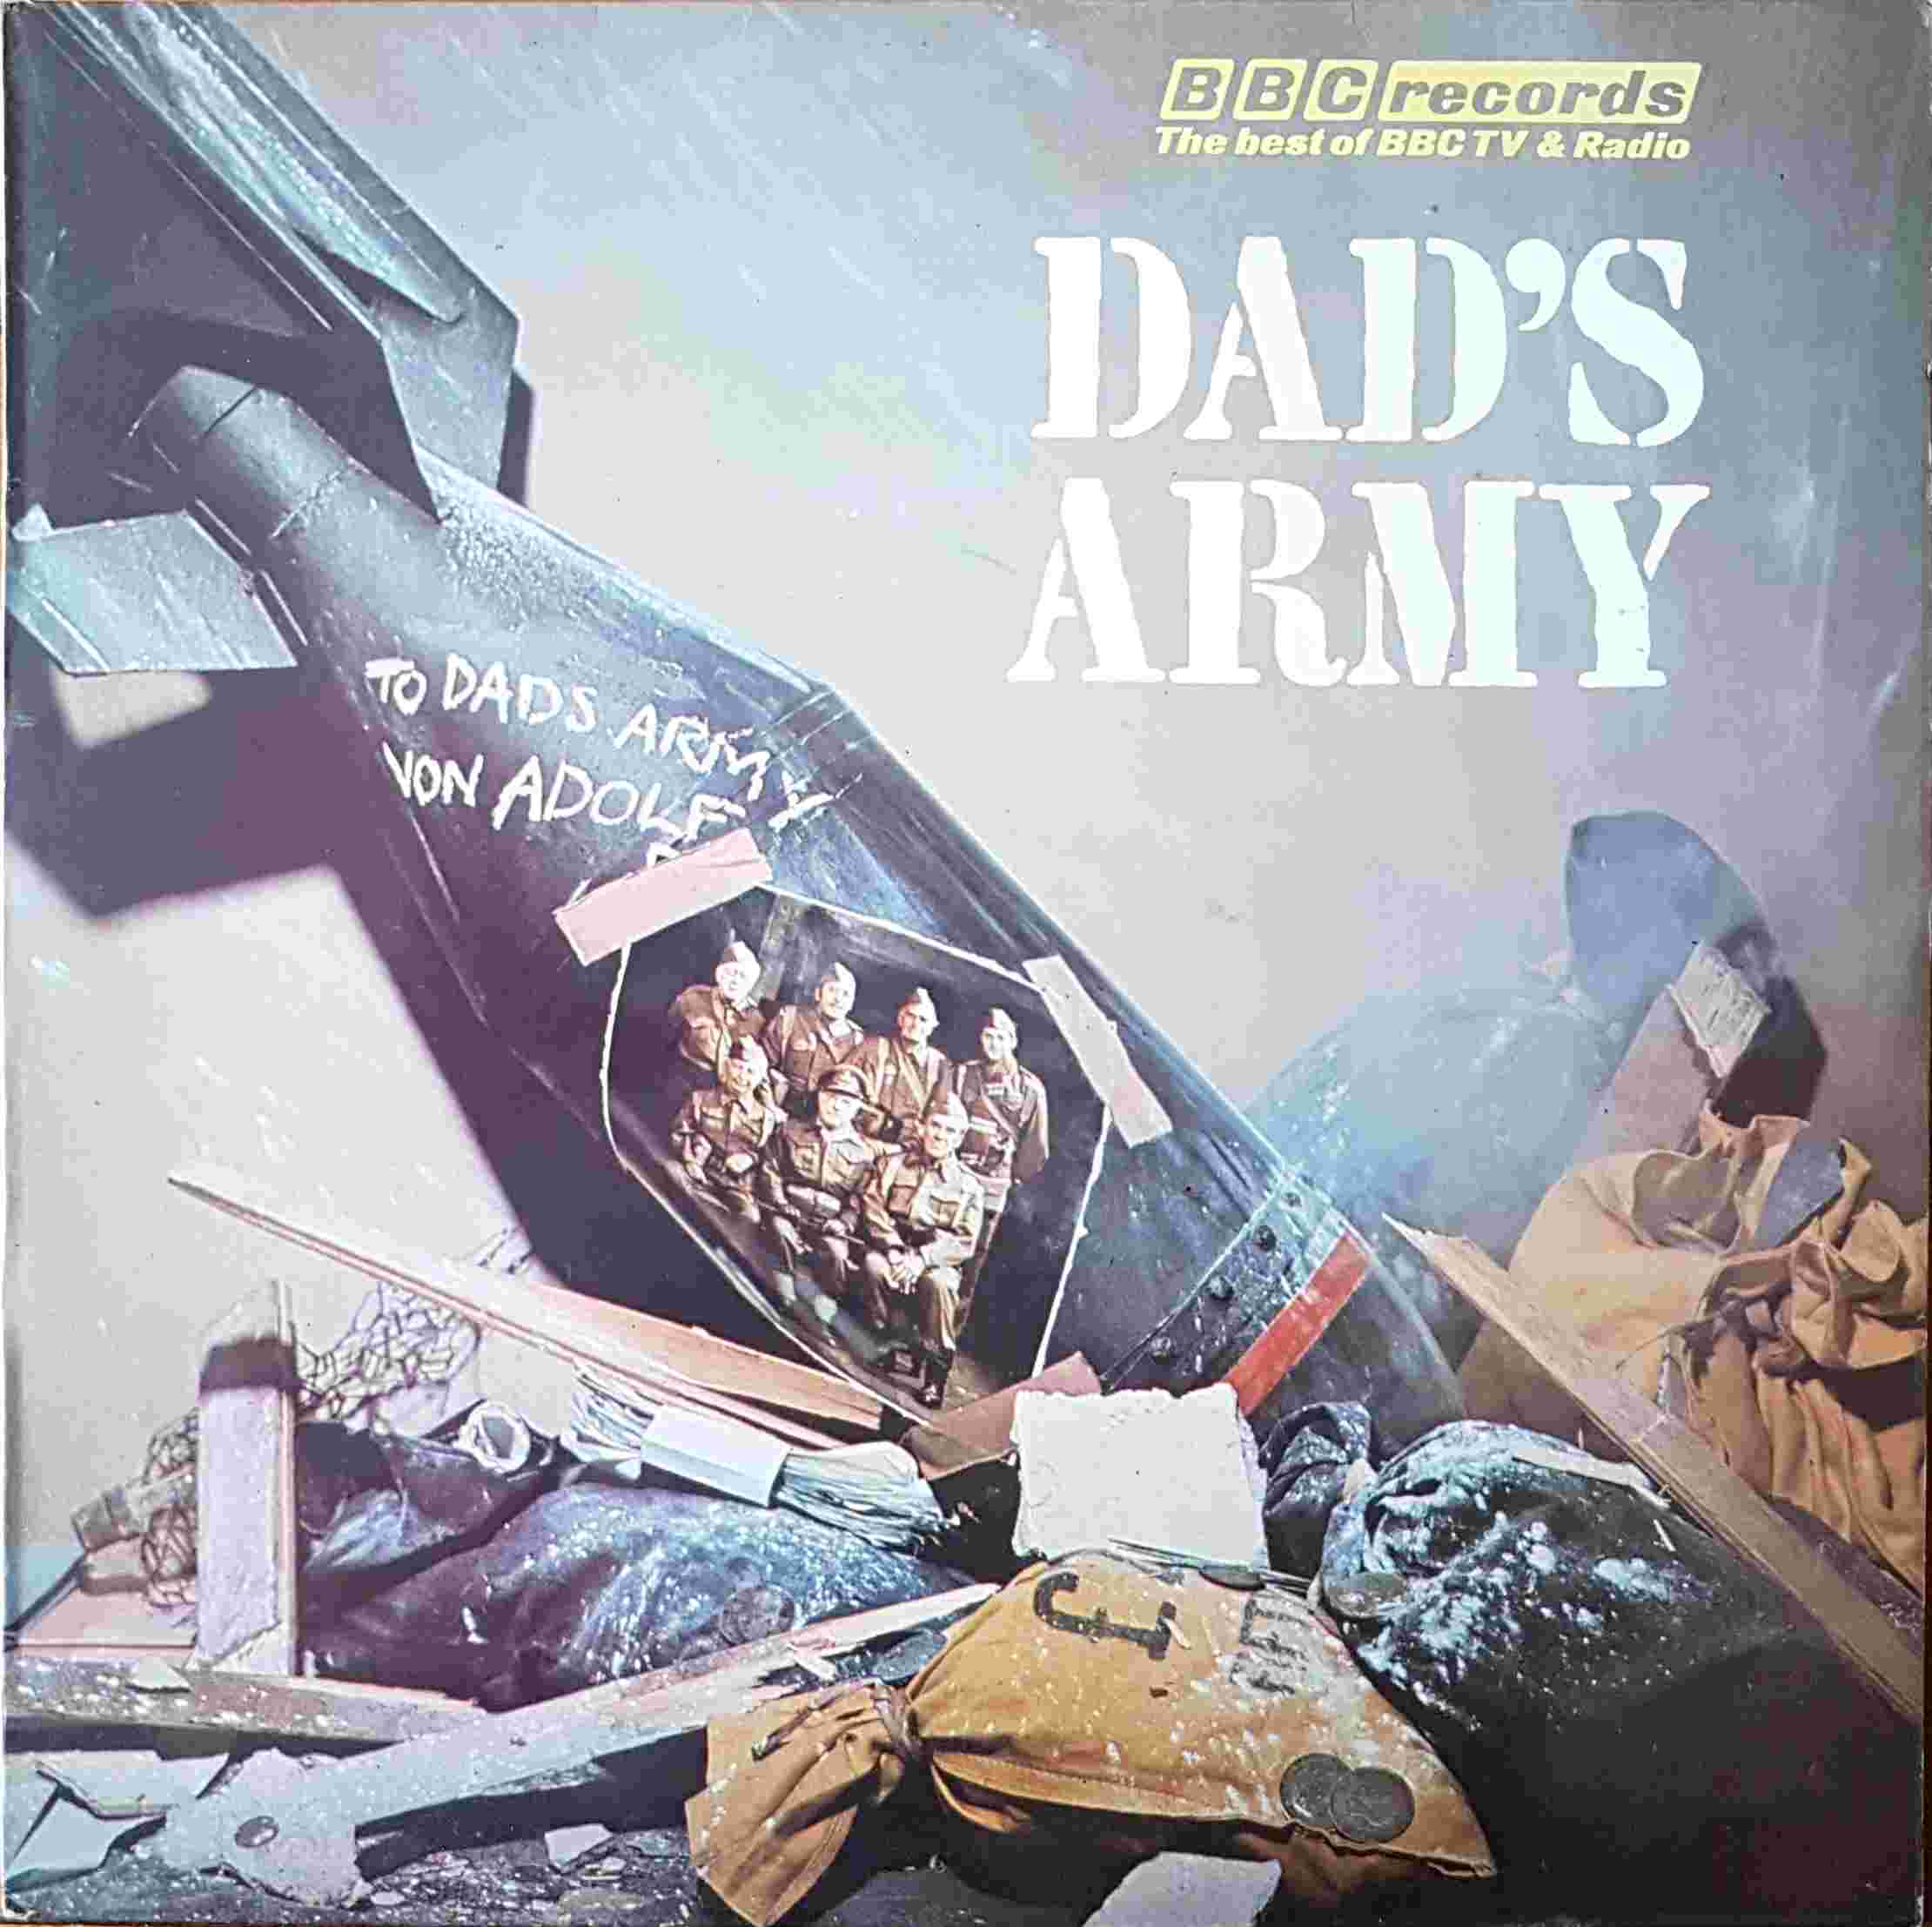 Picture of REH 183 Dad's army by artist David Croft / Jimmy Perry from the BBC albums - Records and Tapes library